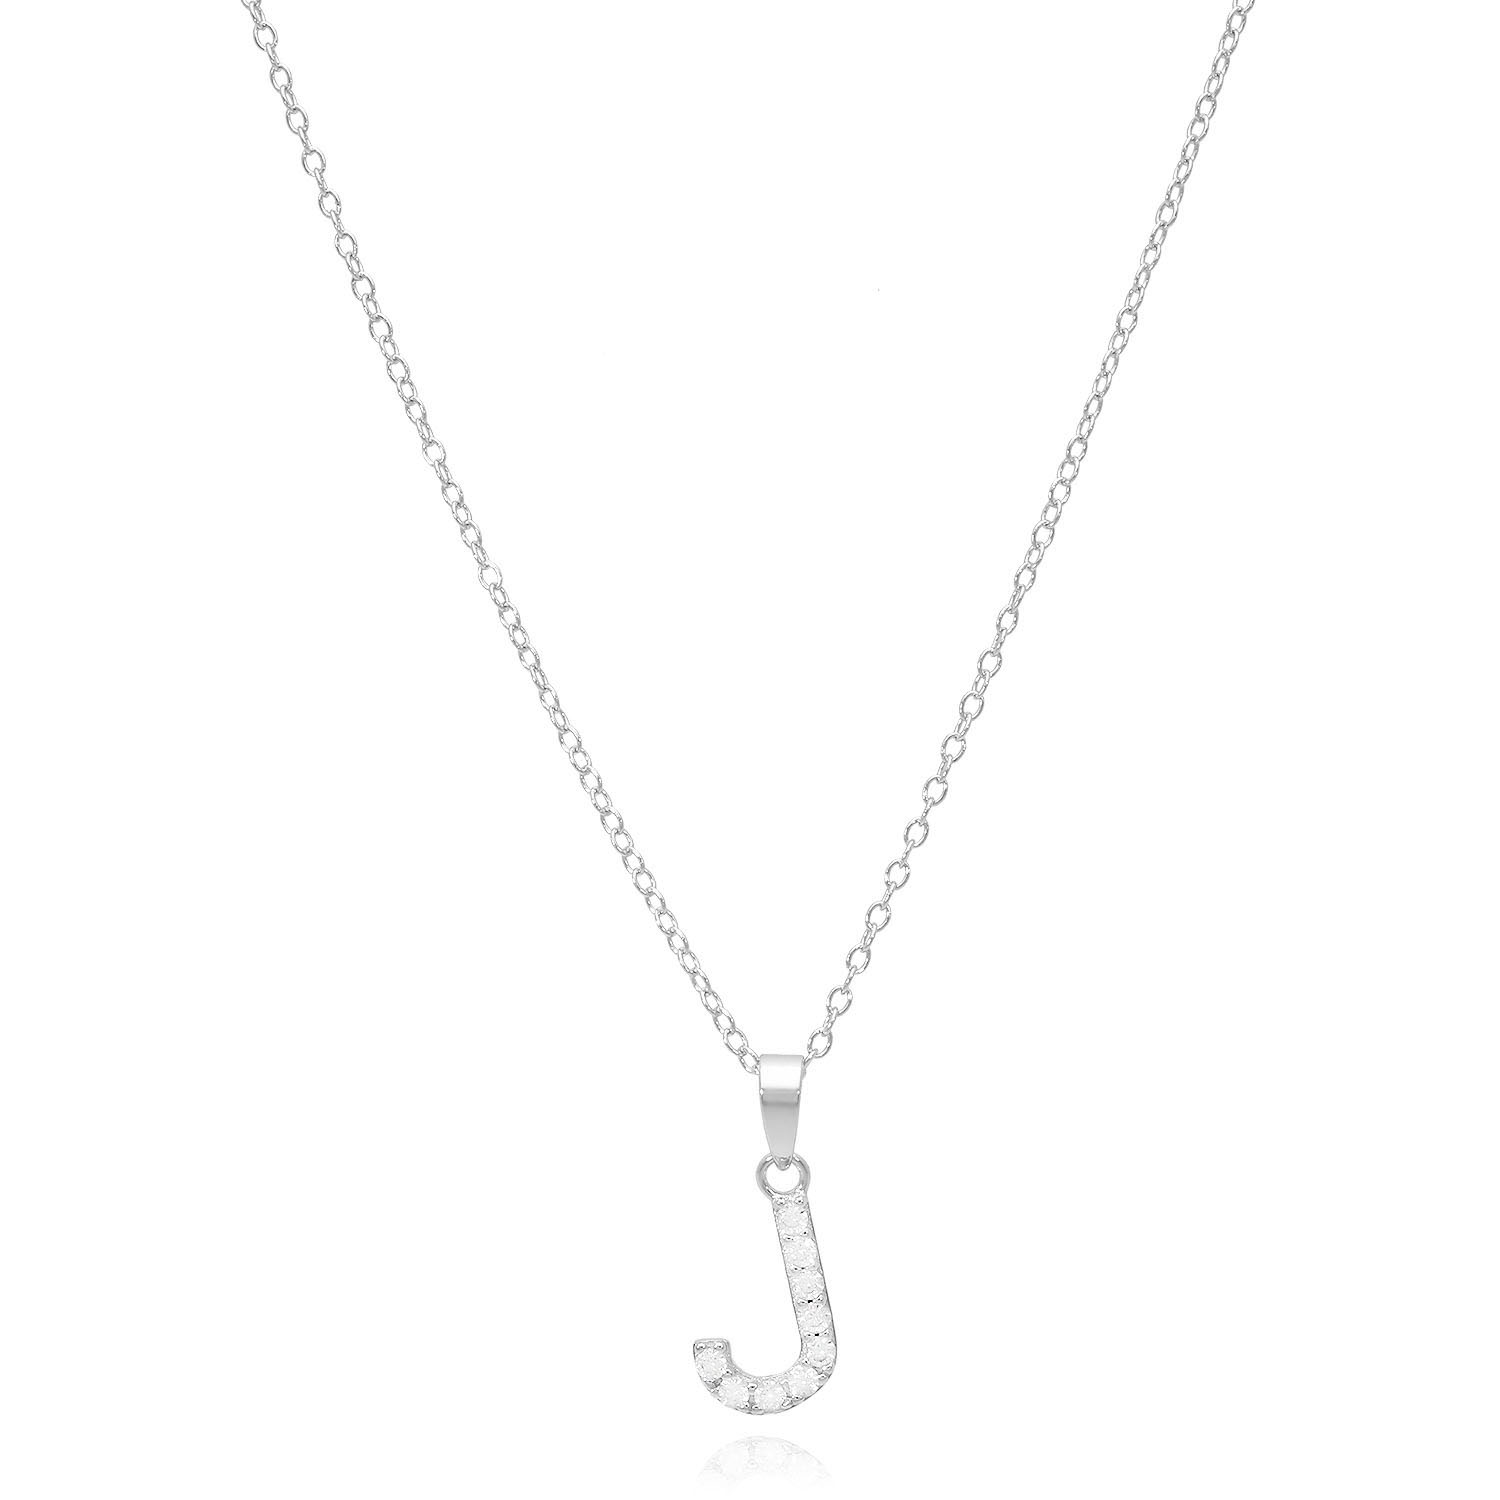 Sterling Silver Simulated Diamond Initial Pendant Chain Necklace 18" - J